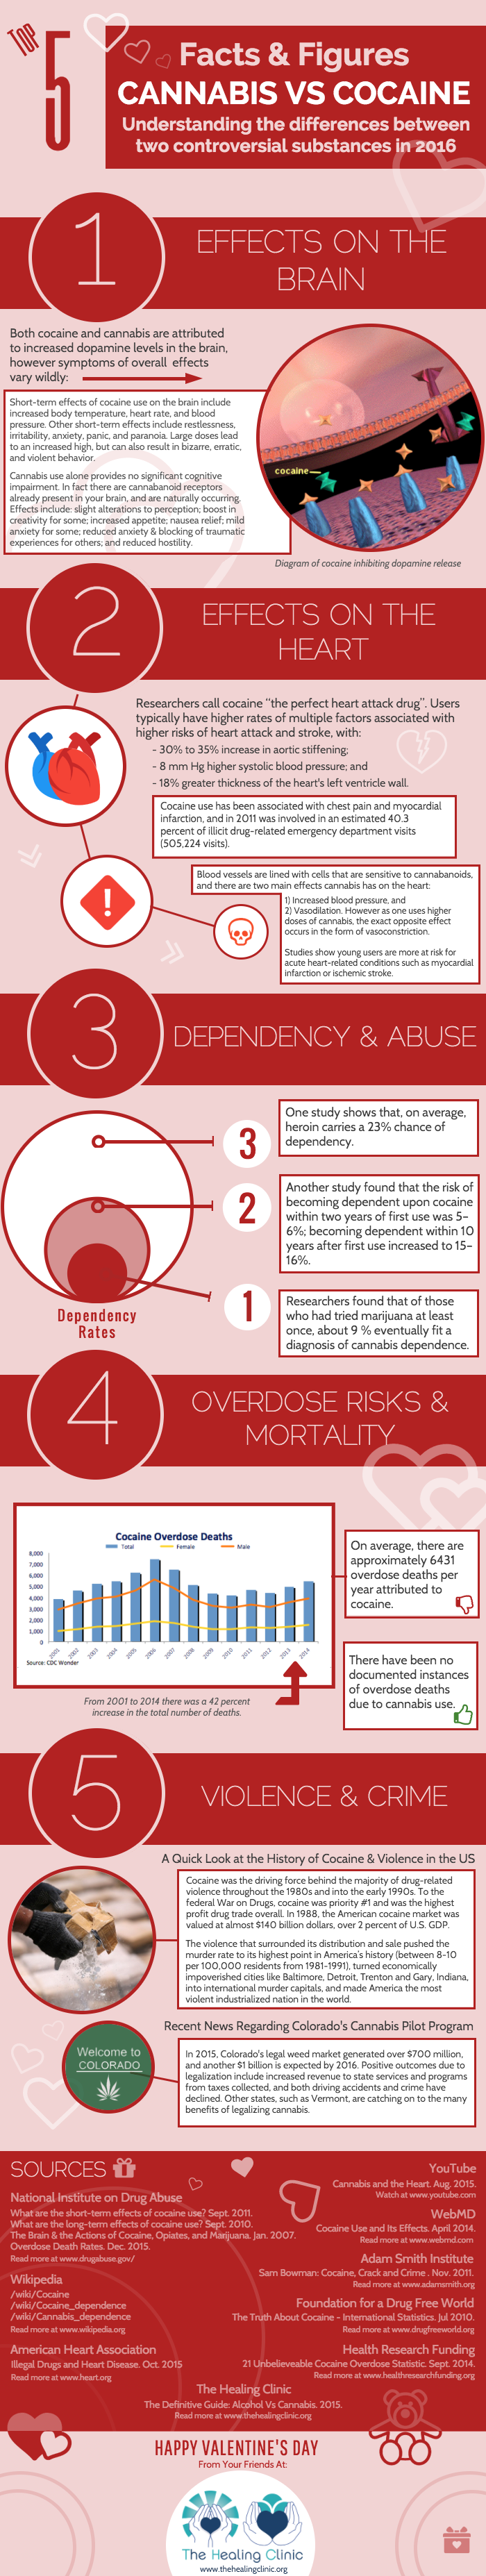 Cannbis Vs Cocaine Infographic by The Healing Clinic. Read more at the THC Blog